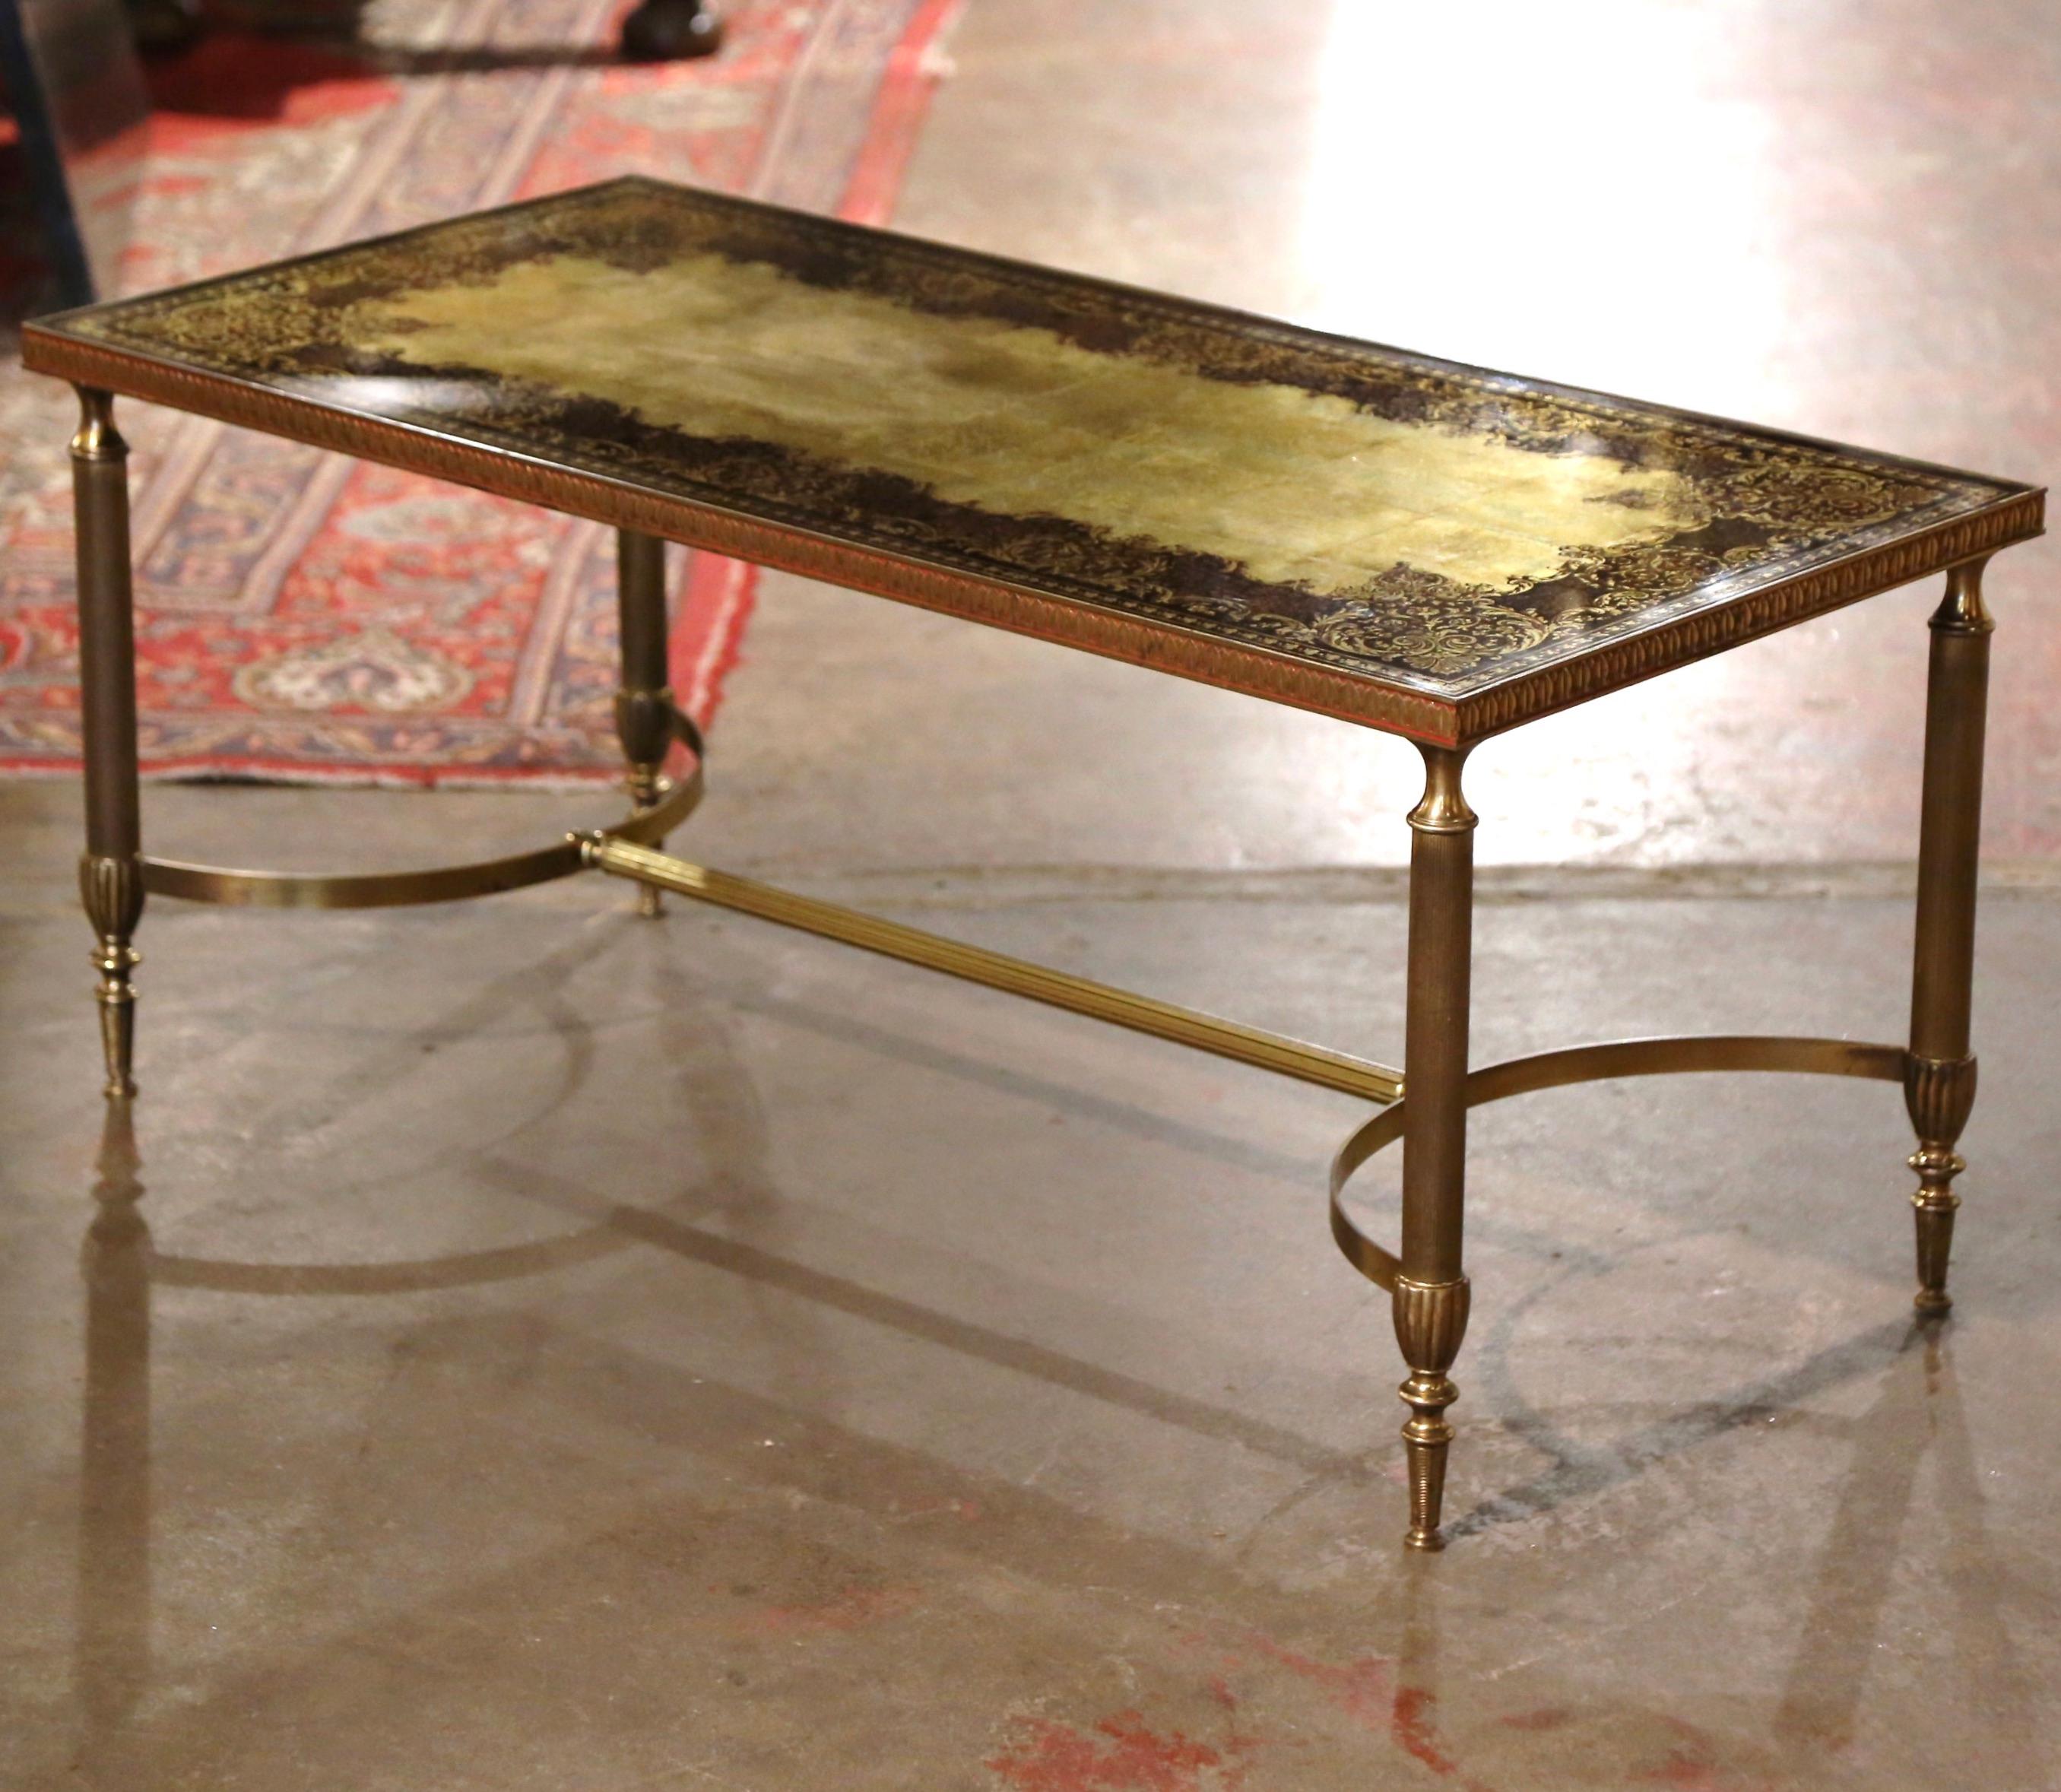 This elegant and slender cocktail table was crafted in France by Maison Baguès circa 1960; the rectangular table stands on four fluted brass legs embellished with ring decor, over an arched bottom stretcher dressed with end finials. The surface is